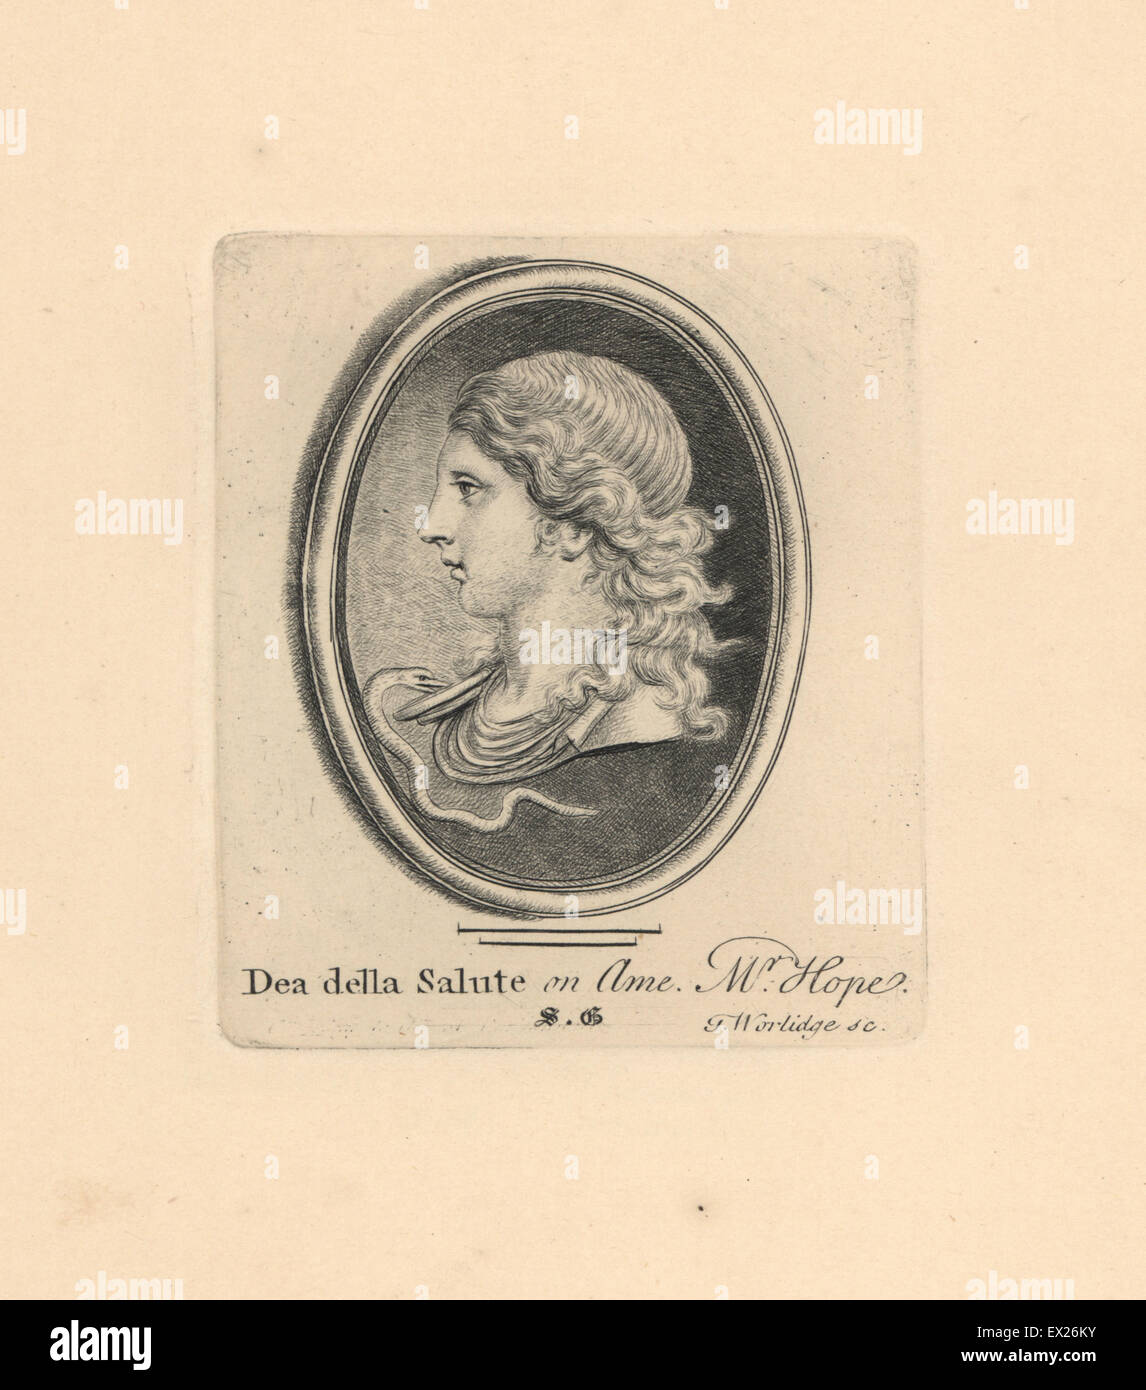 Hygieia, Greek and Roman goddess of health, Dea della Salute, in necklace with snake. From a gem engraved on amethyst in the collection of Mr Hope. Copperplate engraving by Thomas Worlidge from James Vallentin's One Hundred and Eight Engravings from Antique Gems, 1863. Stock Photo